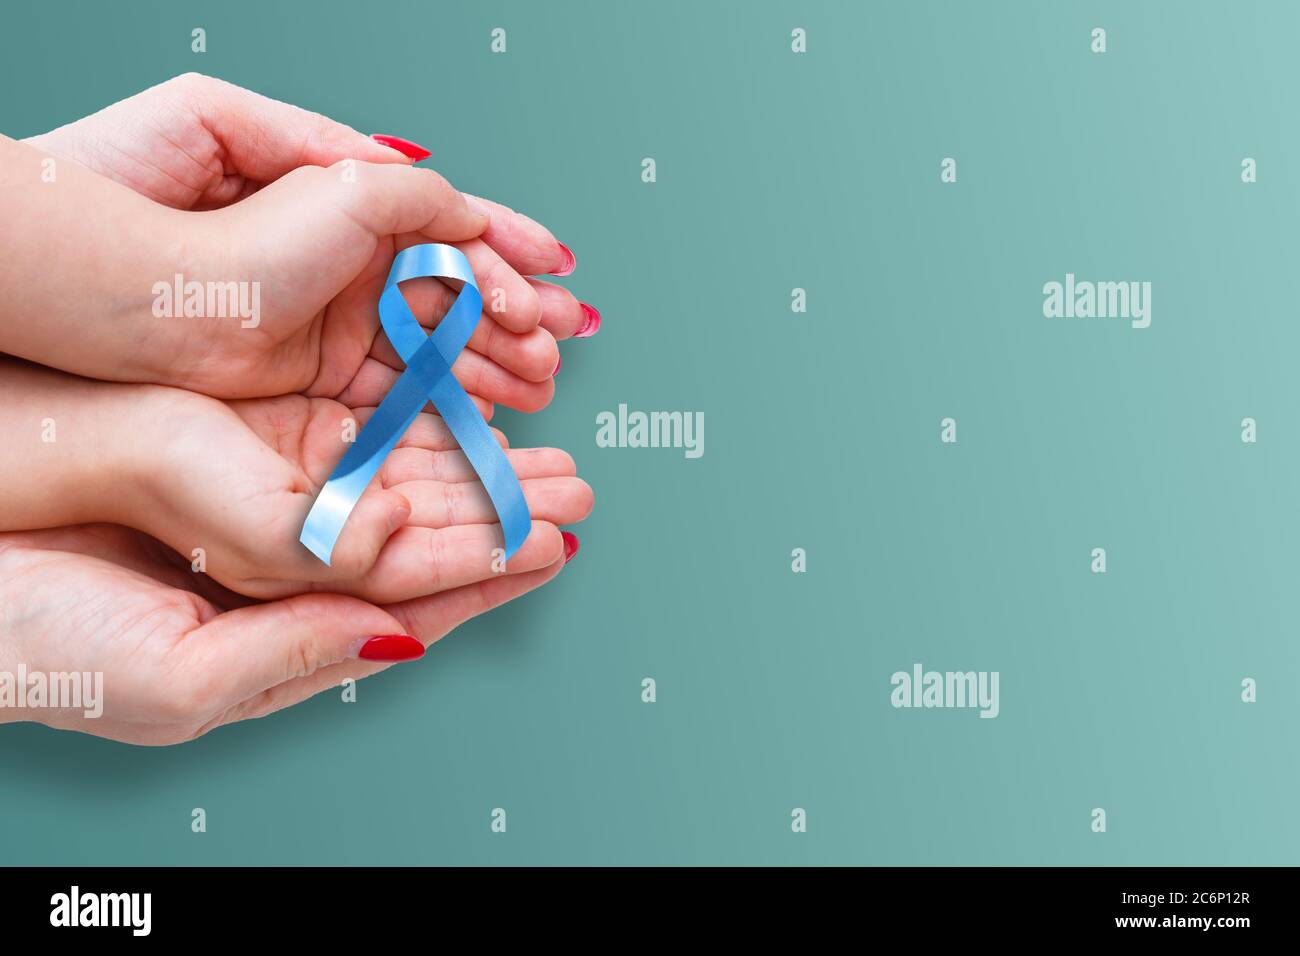 blue ribbon representing an annual event during the month of November to raise awareness of men's health issues and prostate cancer with copy space Stock Photo